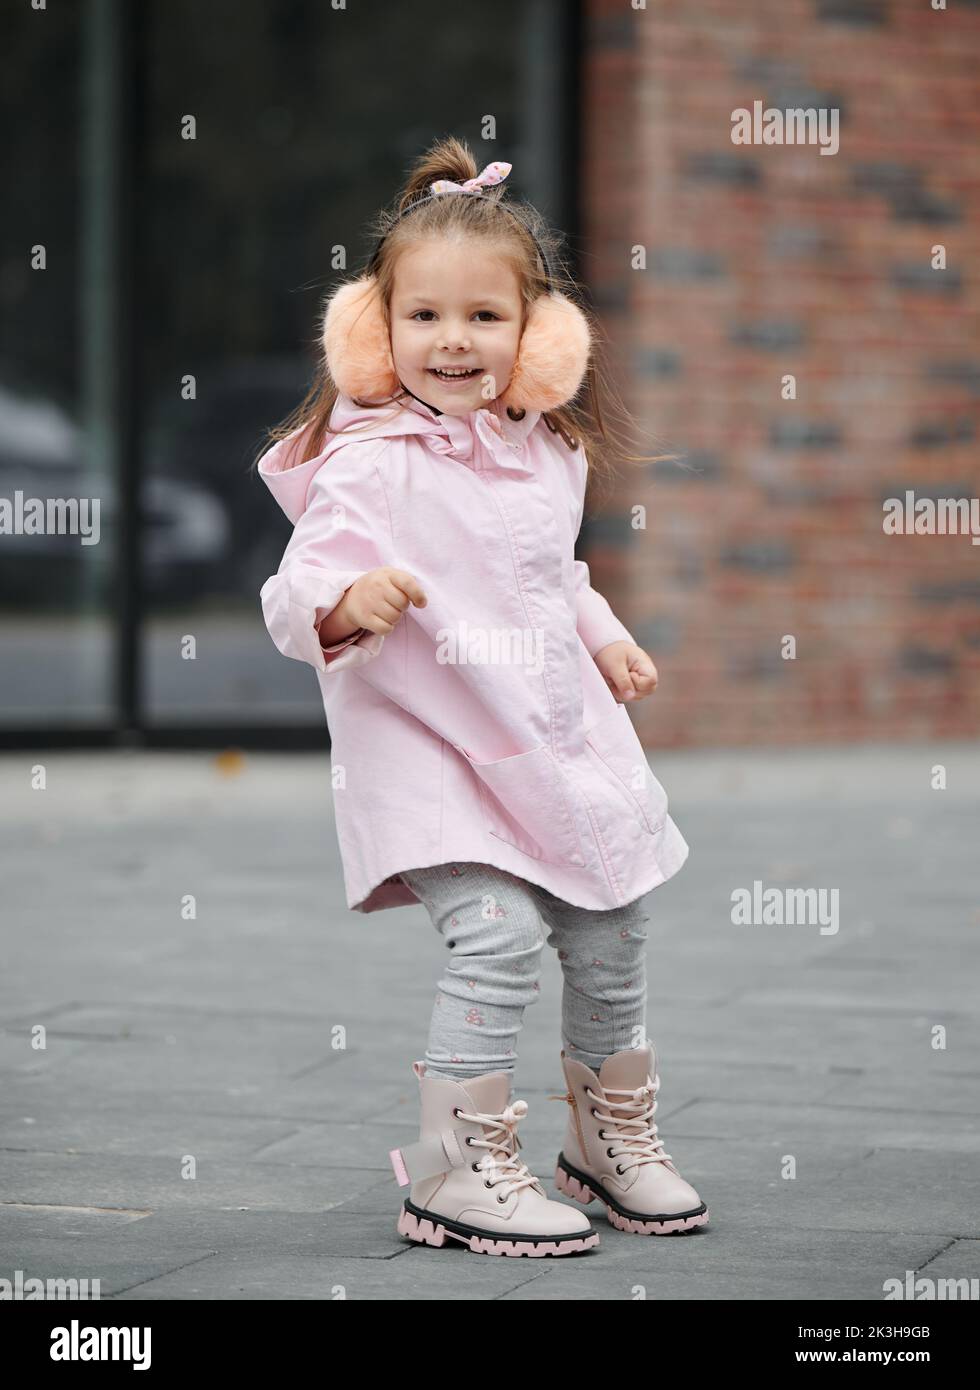 Full length of cute child in pink coat looking at camera and smiling while standing on the street. Happy cheerful kid spending time outdoors in the city. Childhood concept. Stock Photo